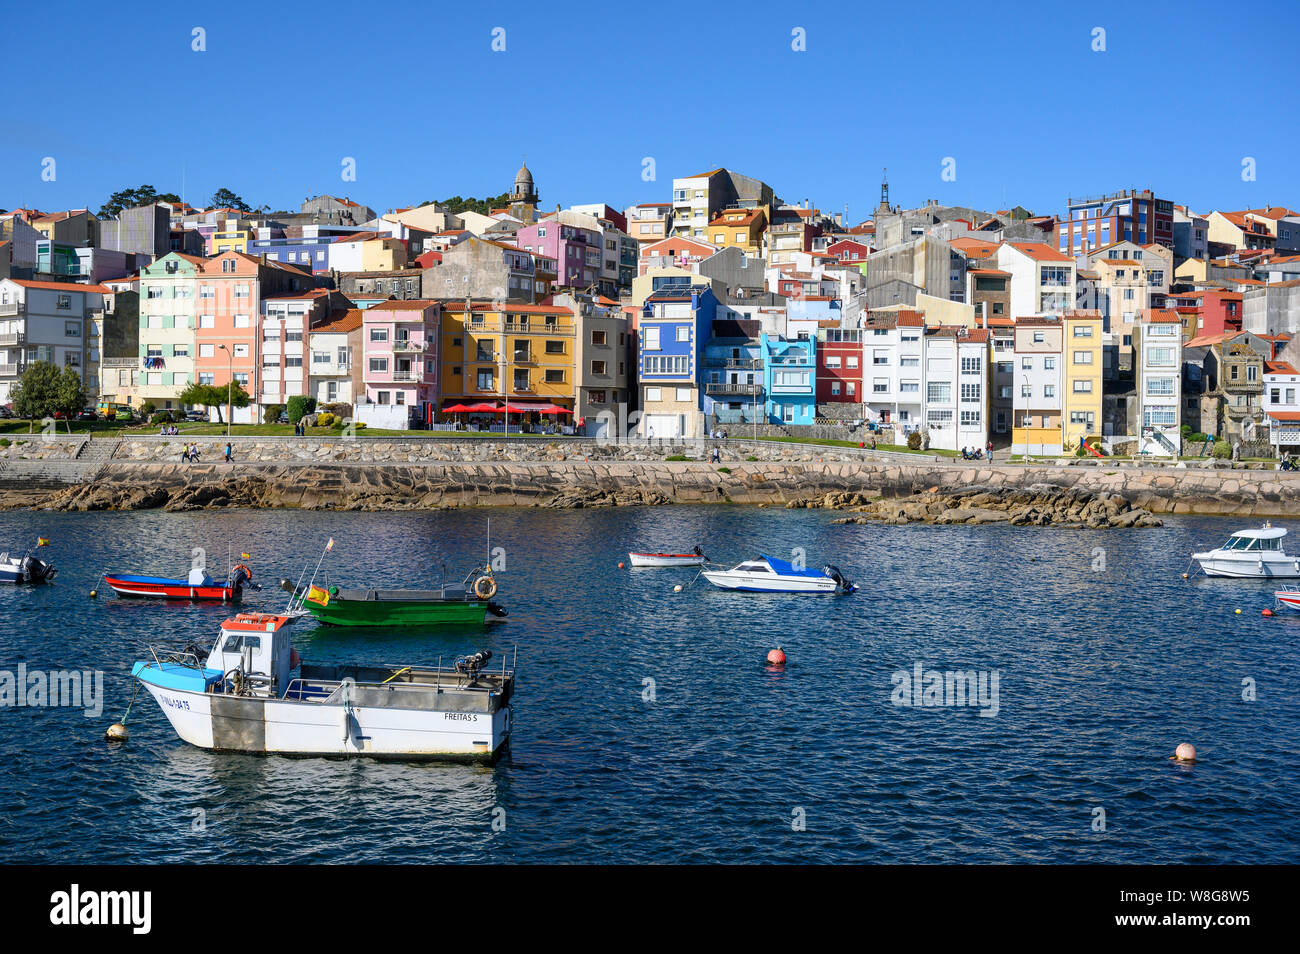 Fishing boats in the harbour at the town of A Guarda in Pontevedra Province, Galicia, North West Spain. Stock Photo